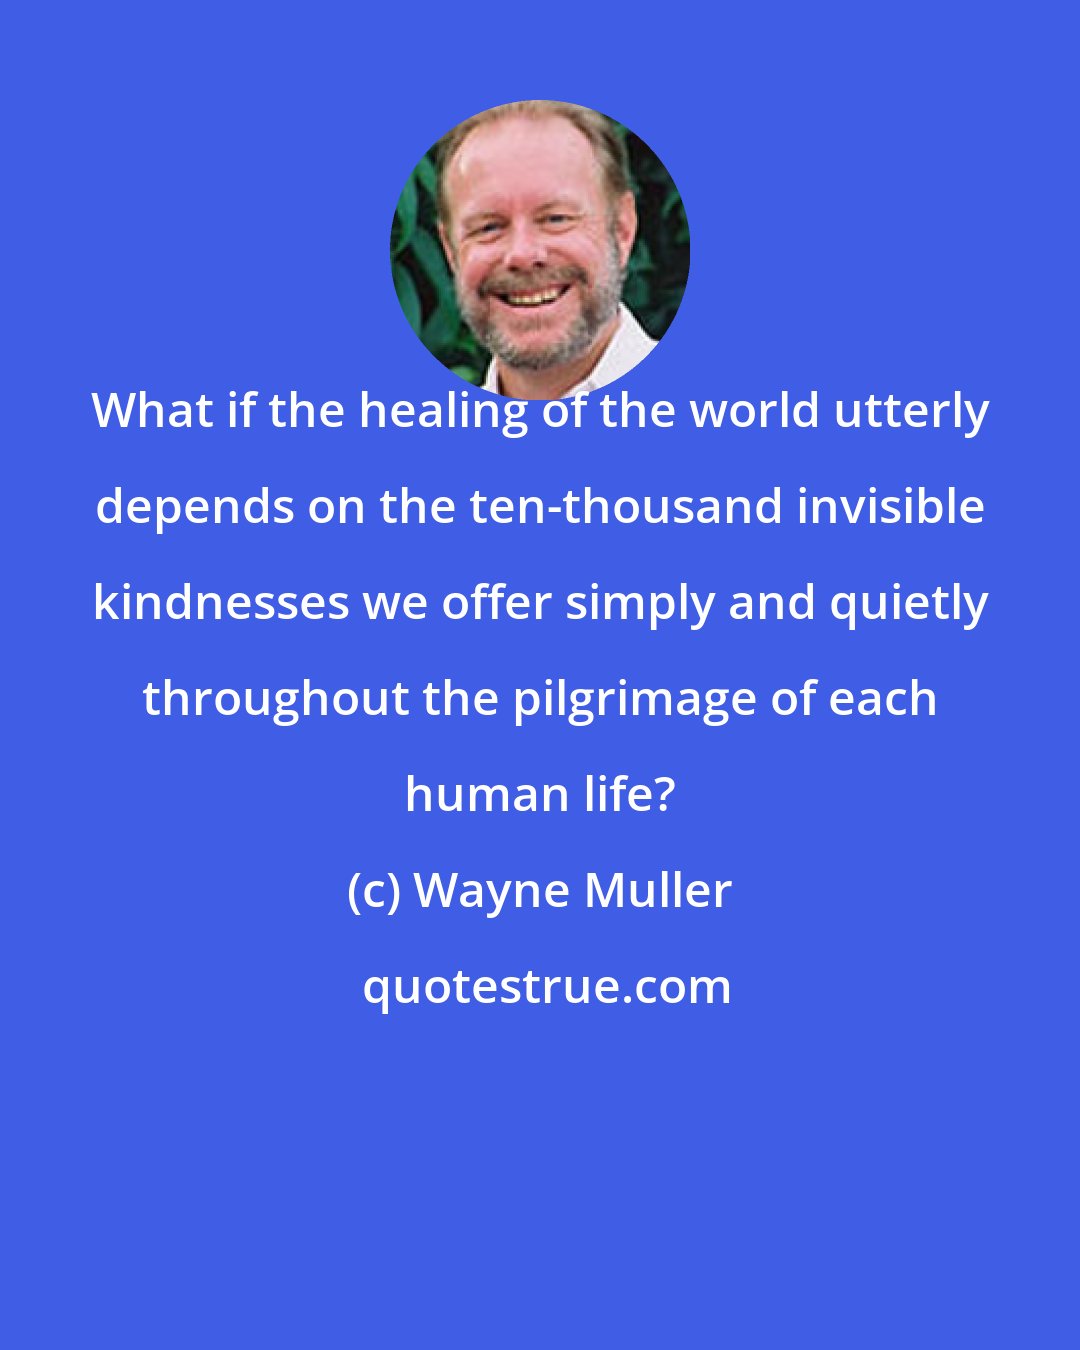 Wayne Muller: What if the healing of the world utterly depends on the ten-thousand invisible kindnesses we offer simply and quietly throughout the pilgrimage of each human life?